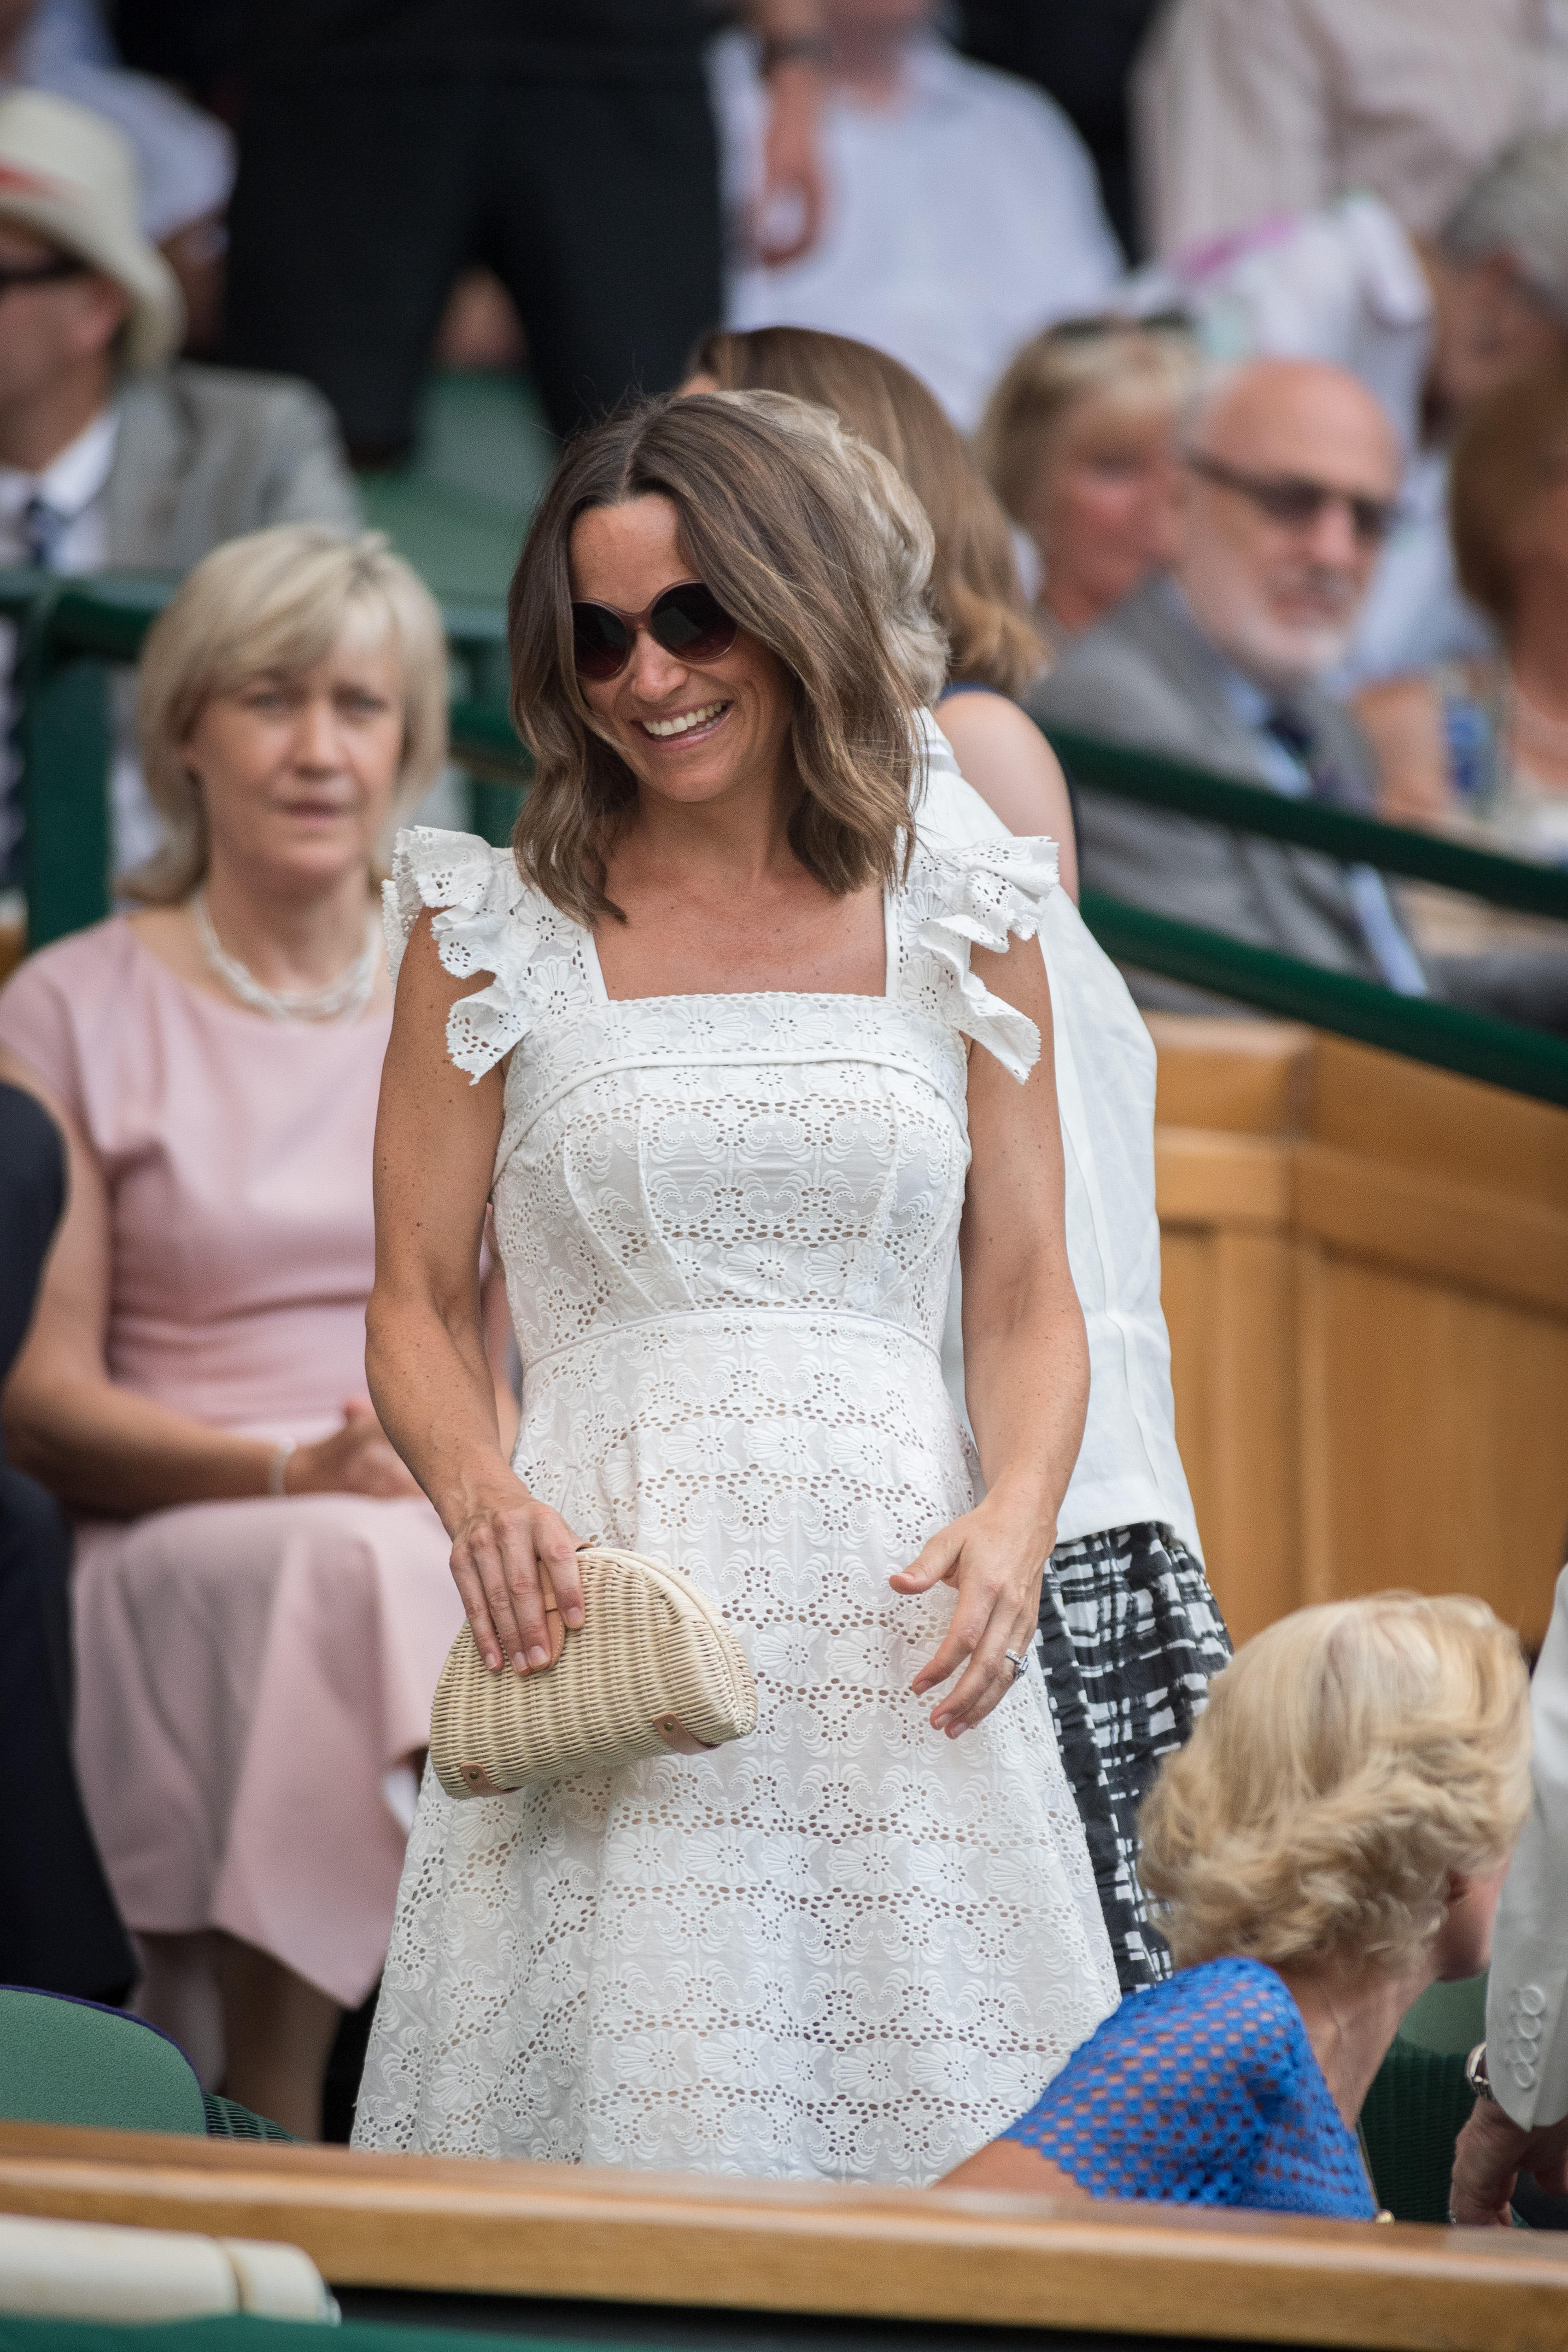 Pippa Middleton, sister of the Princess of Wales, wore a lace square-neck white sundress to Wimbledon 2018 (Alamy/PA)Pippa Middleton t